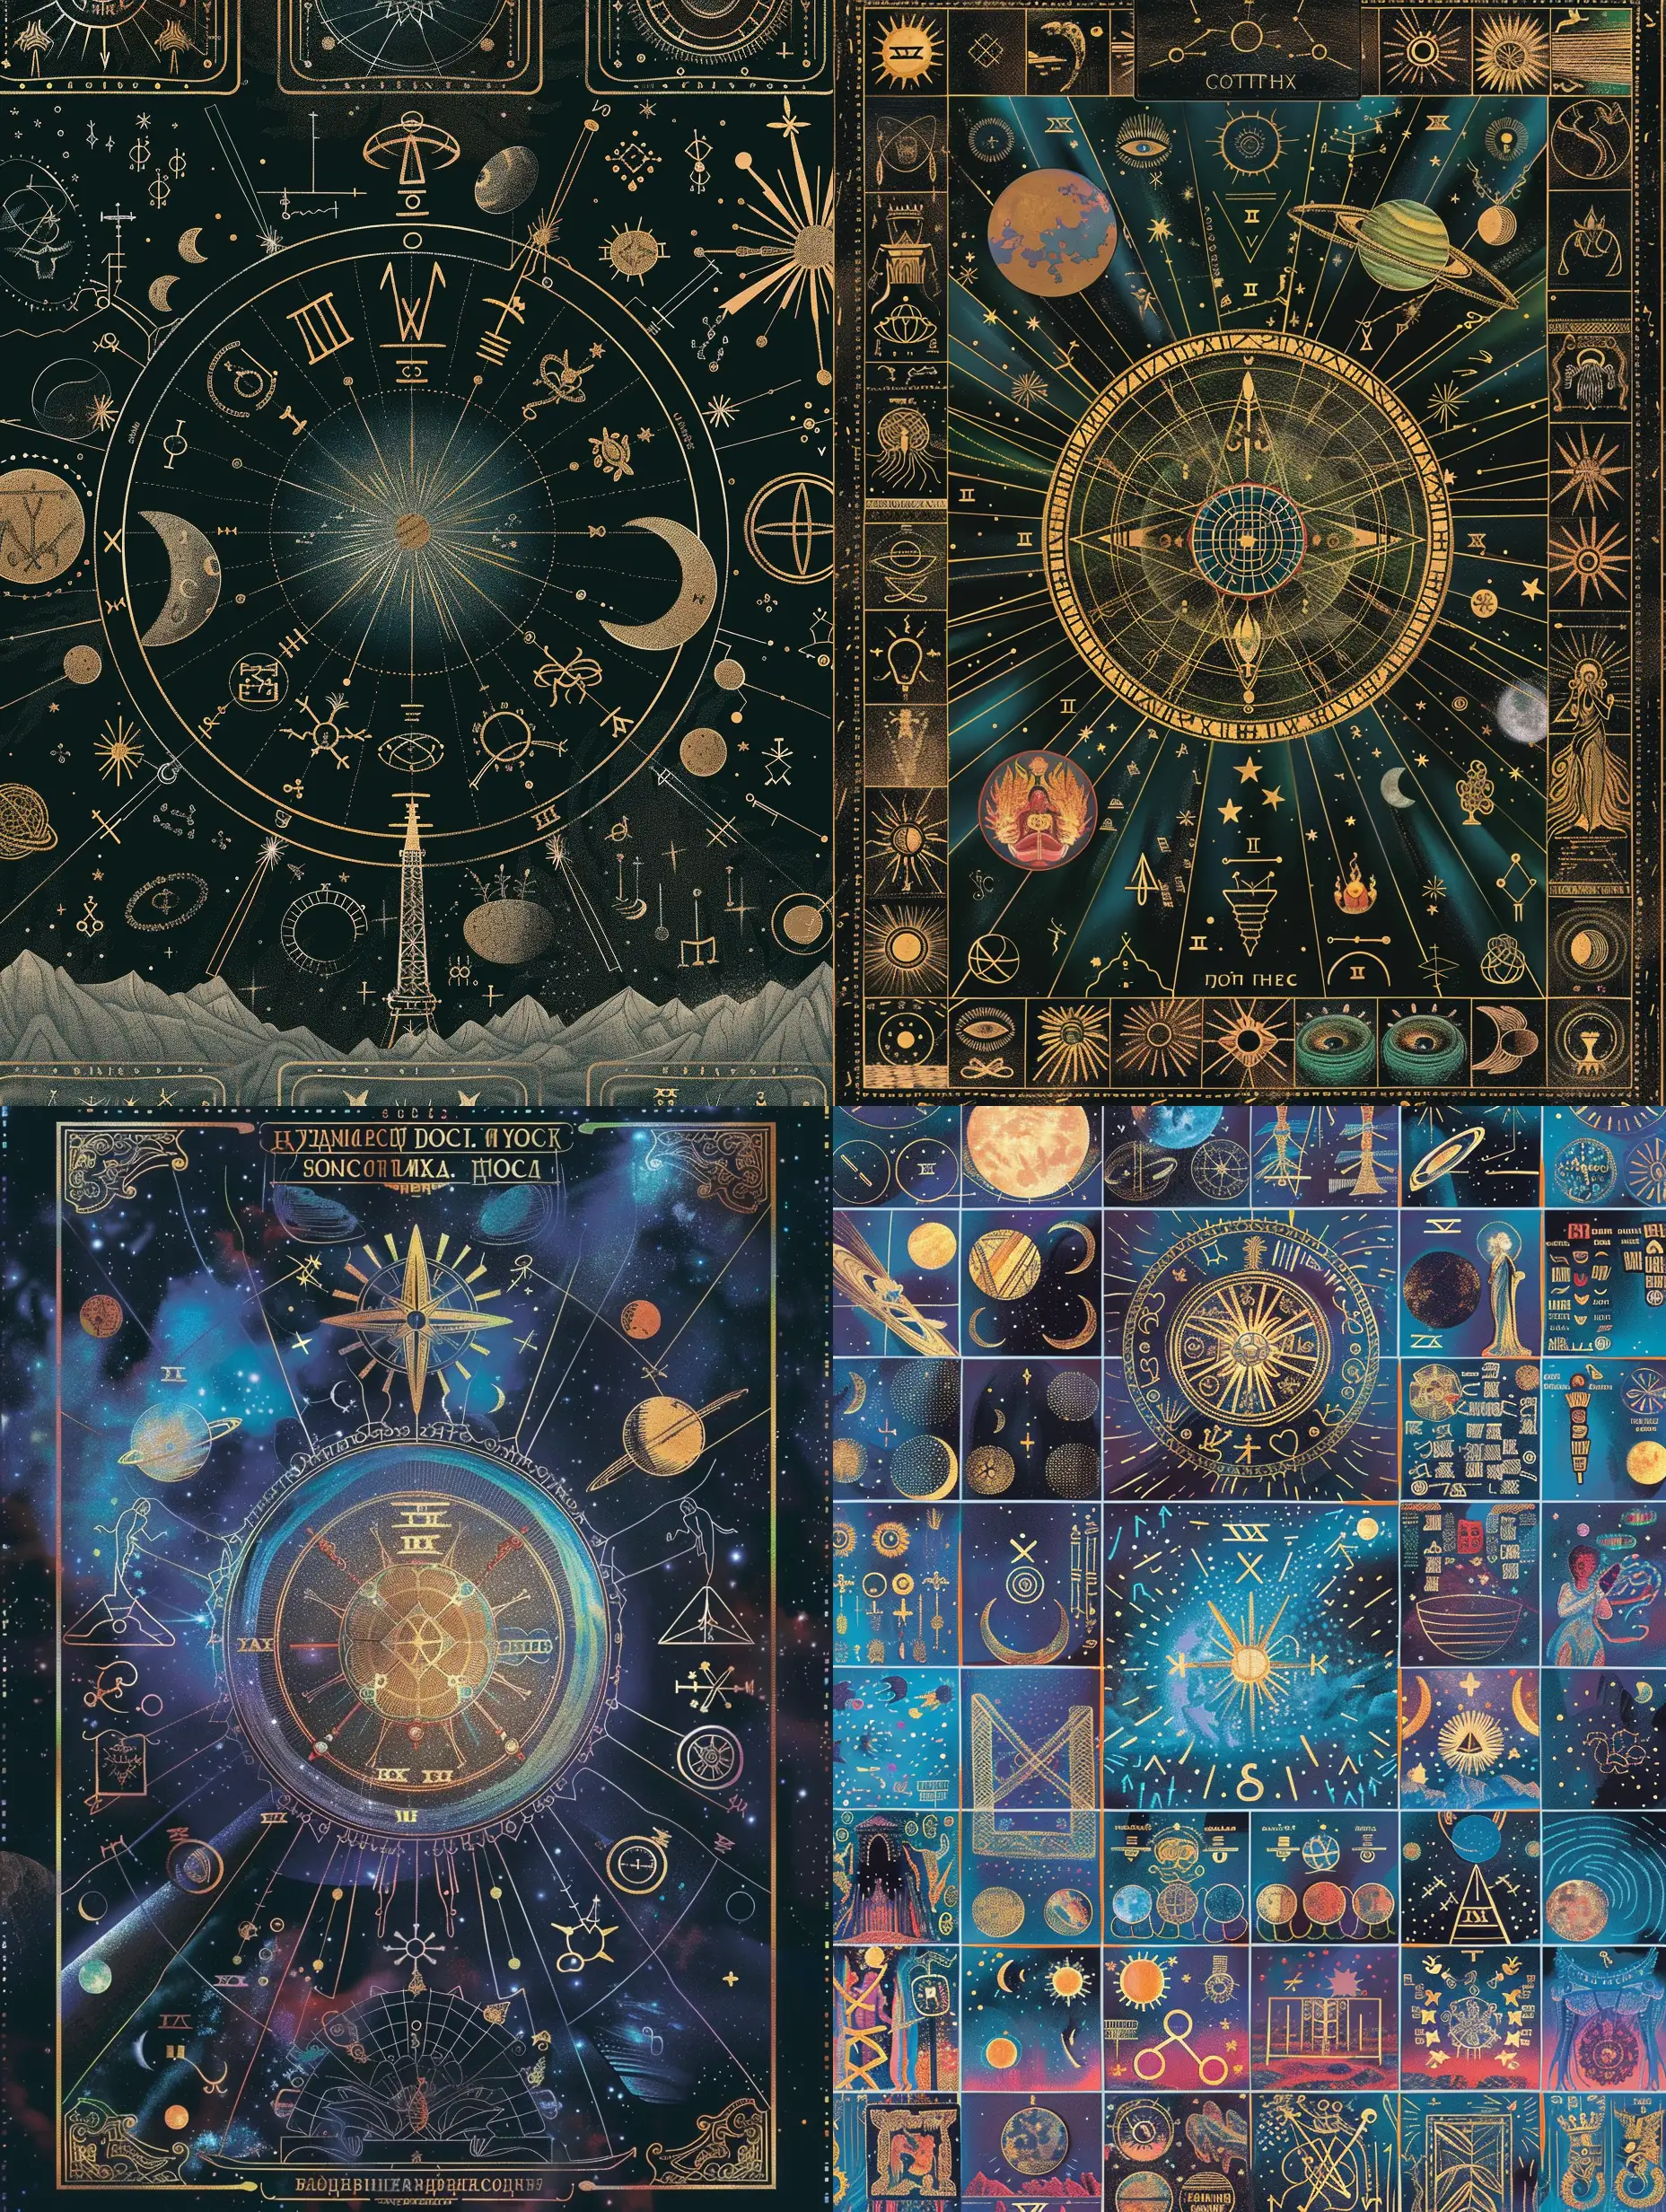 write a cover for tarot cards in on which to display the symbols of planets, zadiac signs, chakras and elements